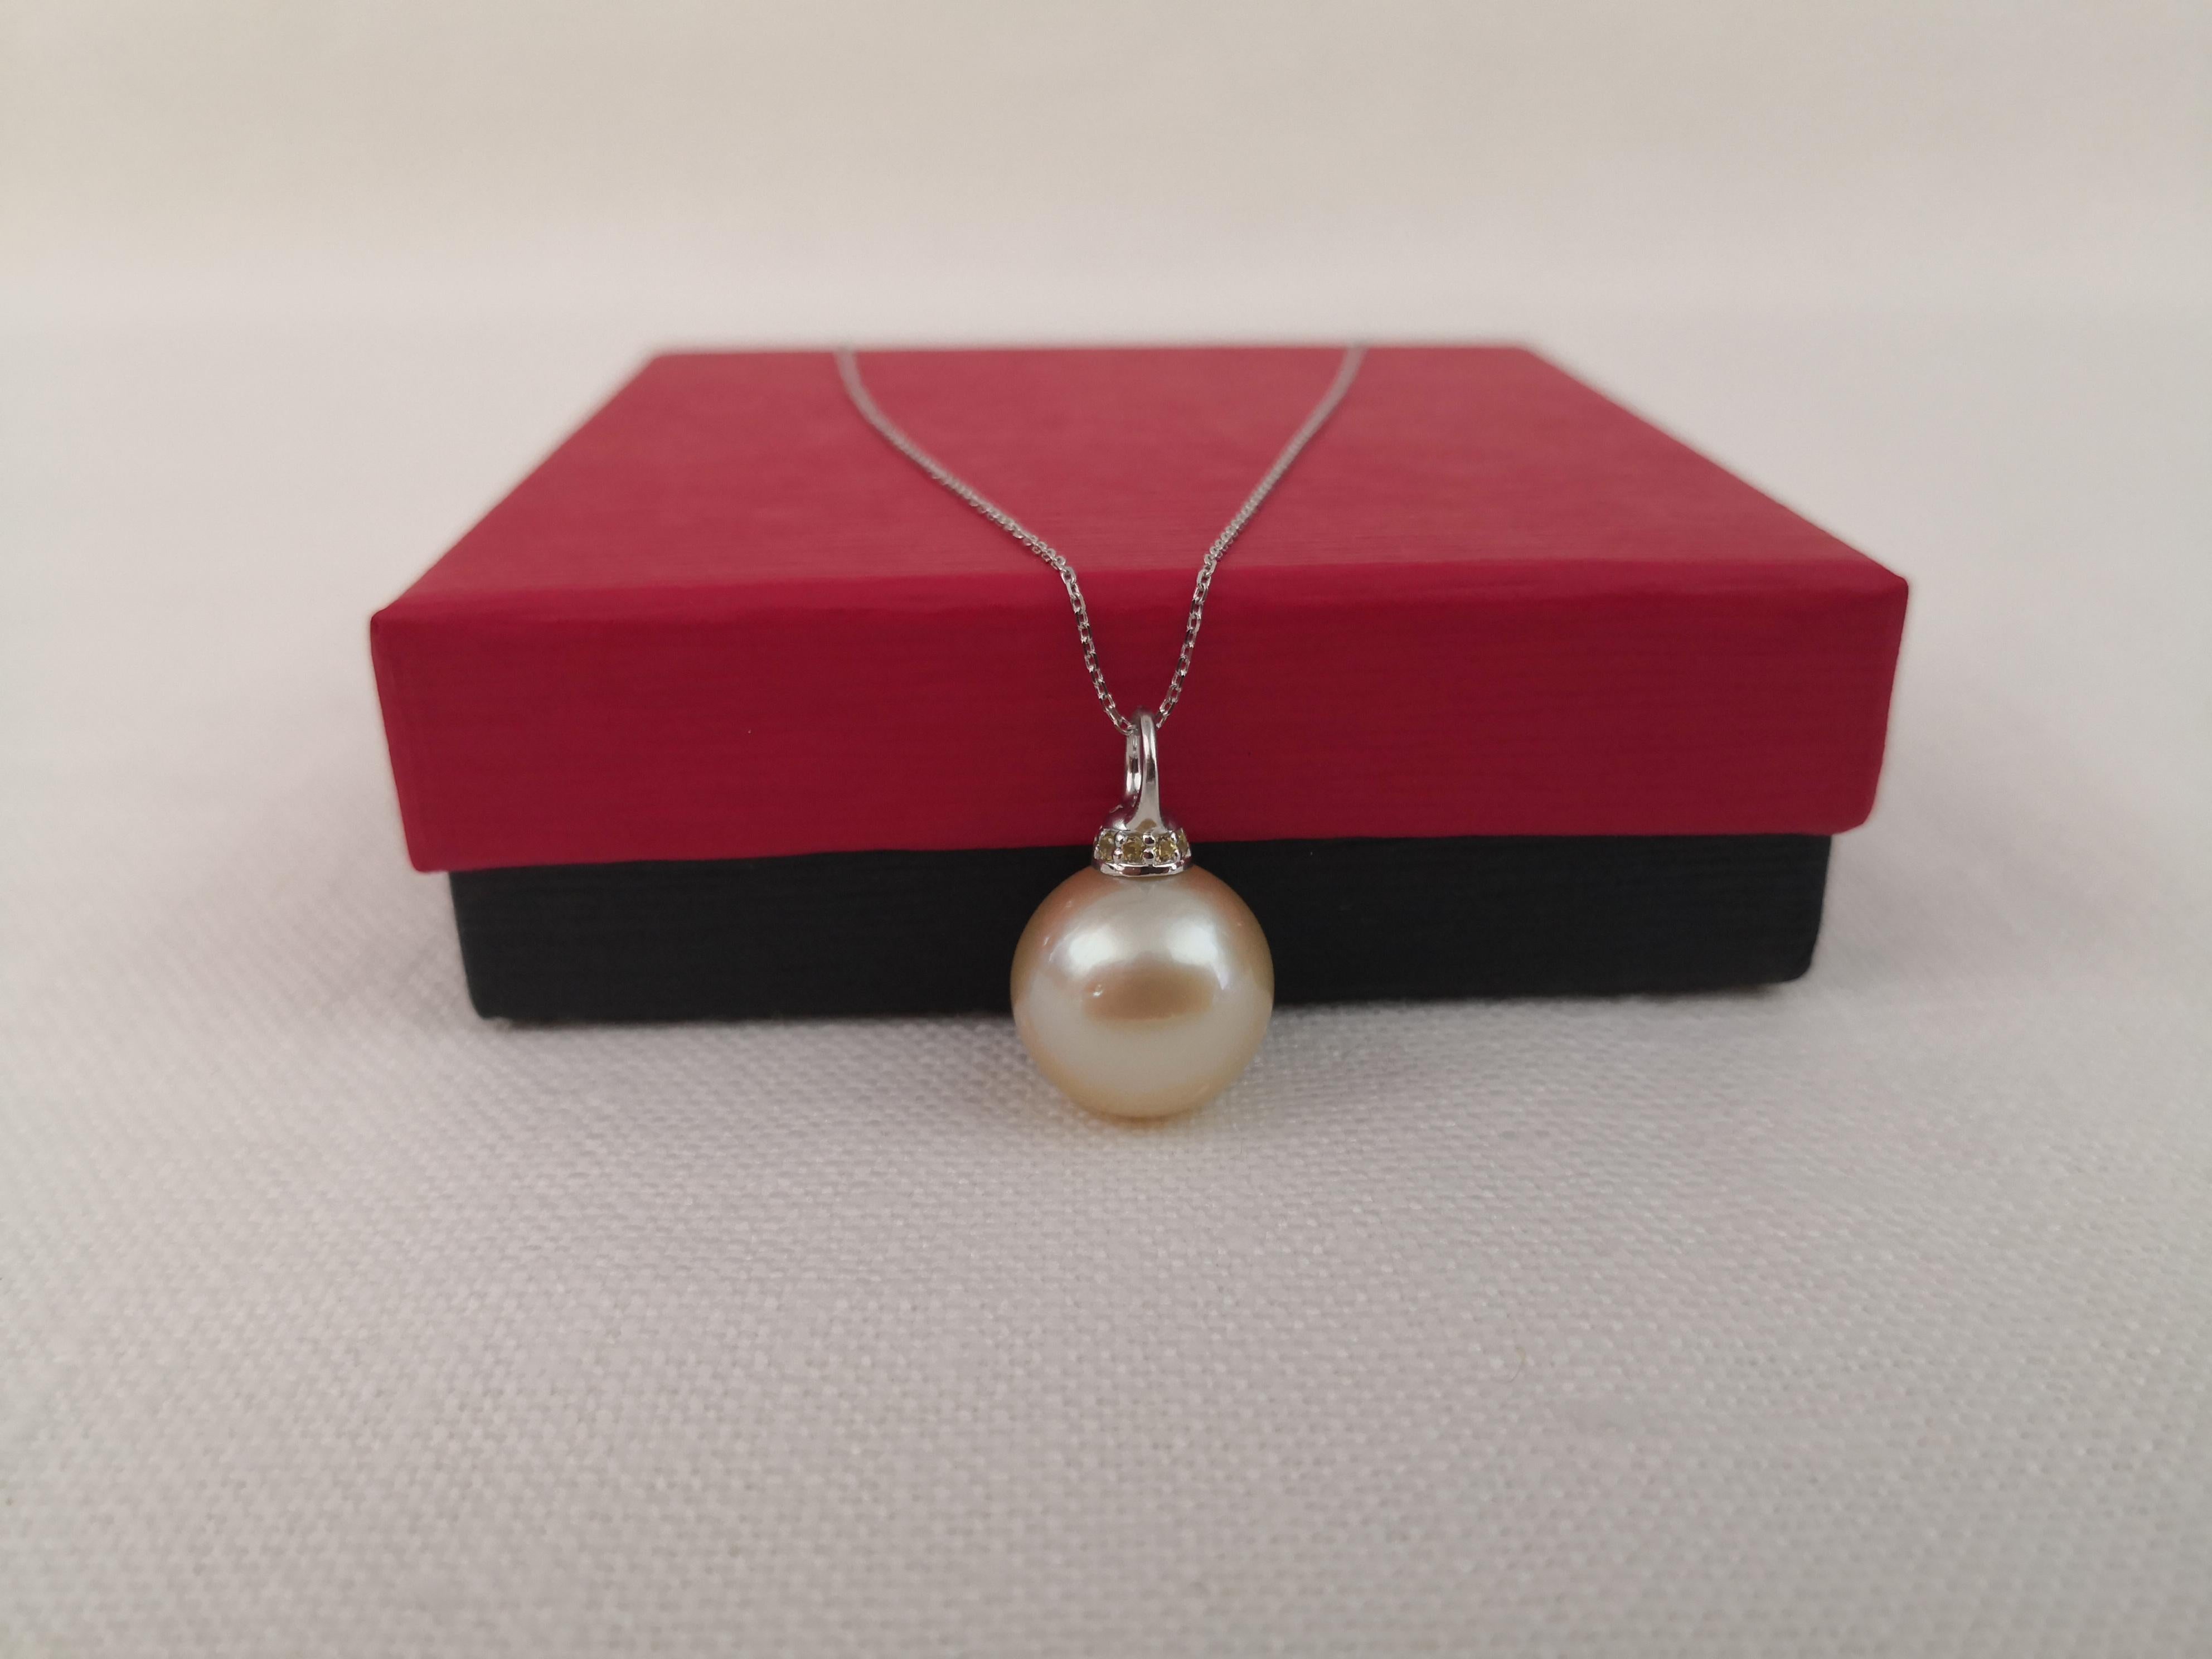 A Necklace Pendant of South Sea Pearl, Diamonds and 18 Karat Gold.

- South Sea Pearl from Pinctada Maxima Oyster
- Origin Indonesia Ocean waters
- Pearl of Natural Color and Luster
- Size of Pearl 14 mm
- Pearl of Round Shape
- Quality AAA
- Yellow